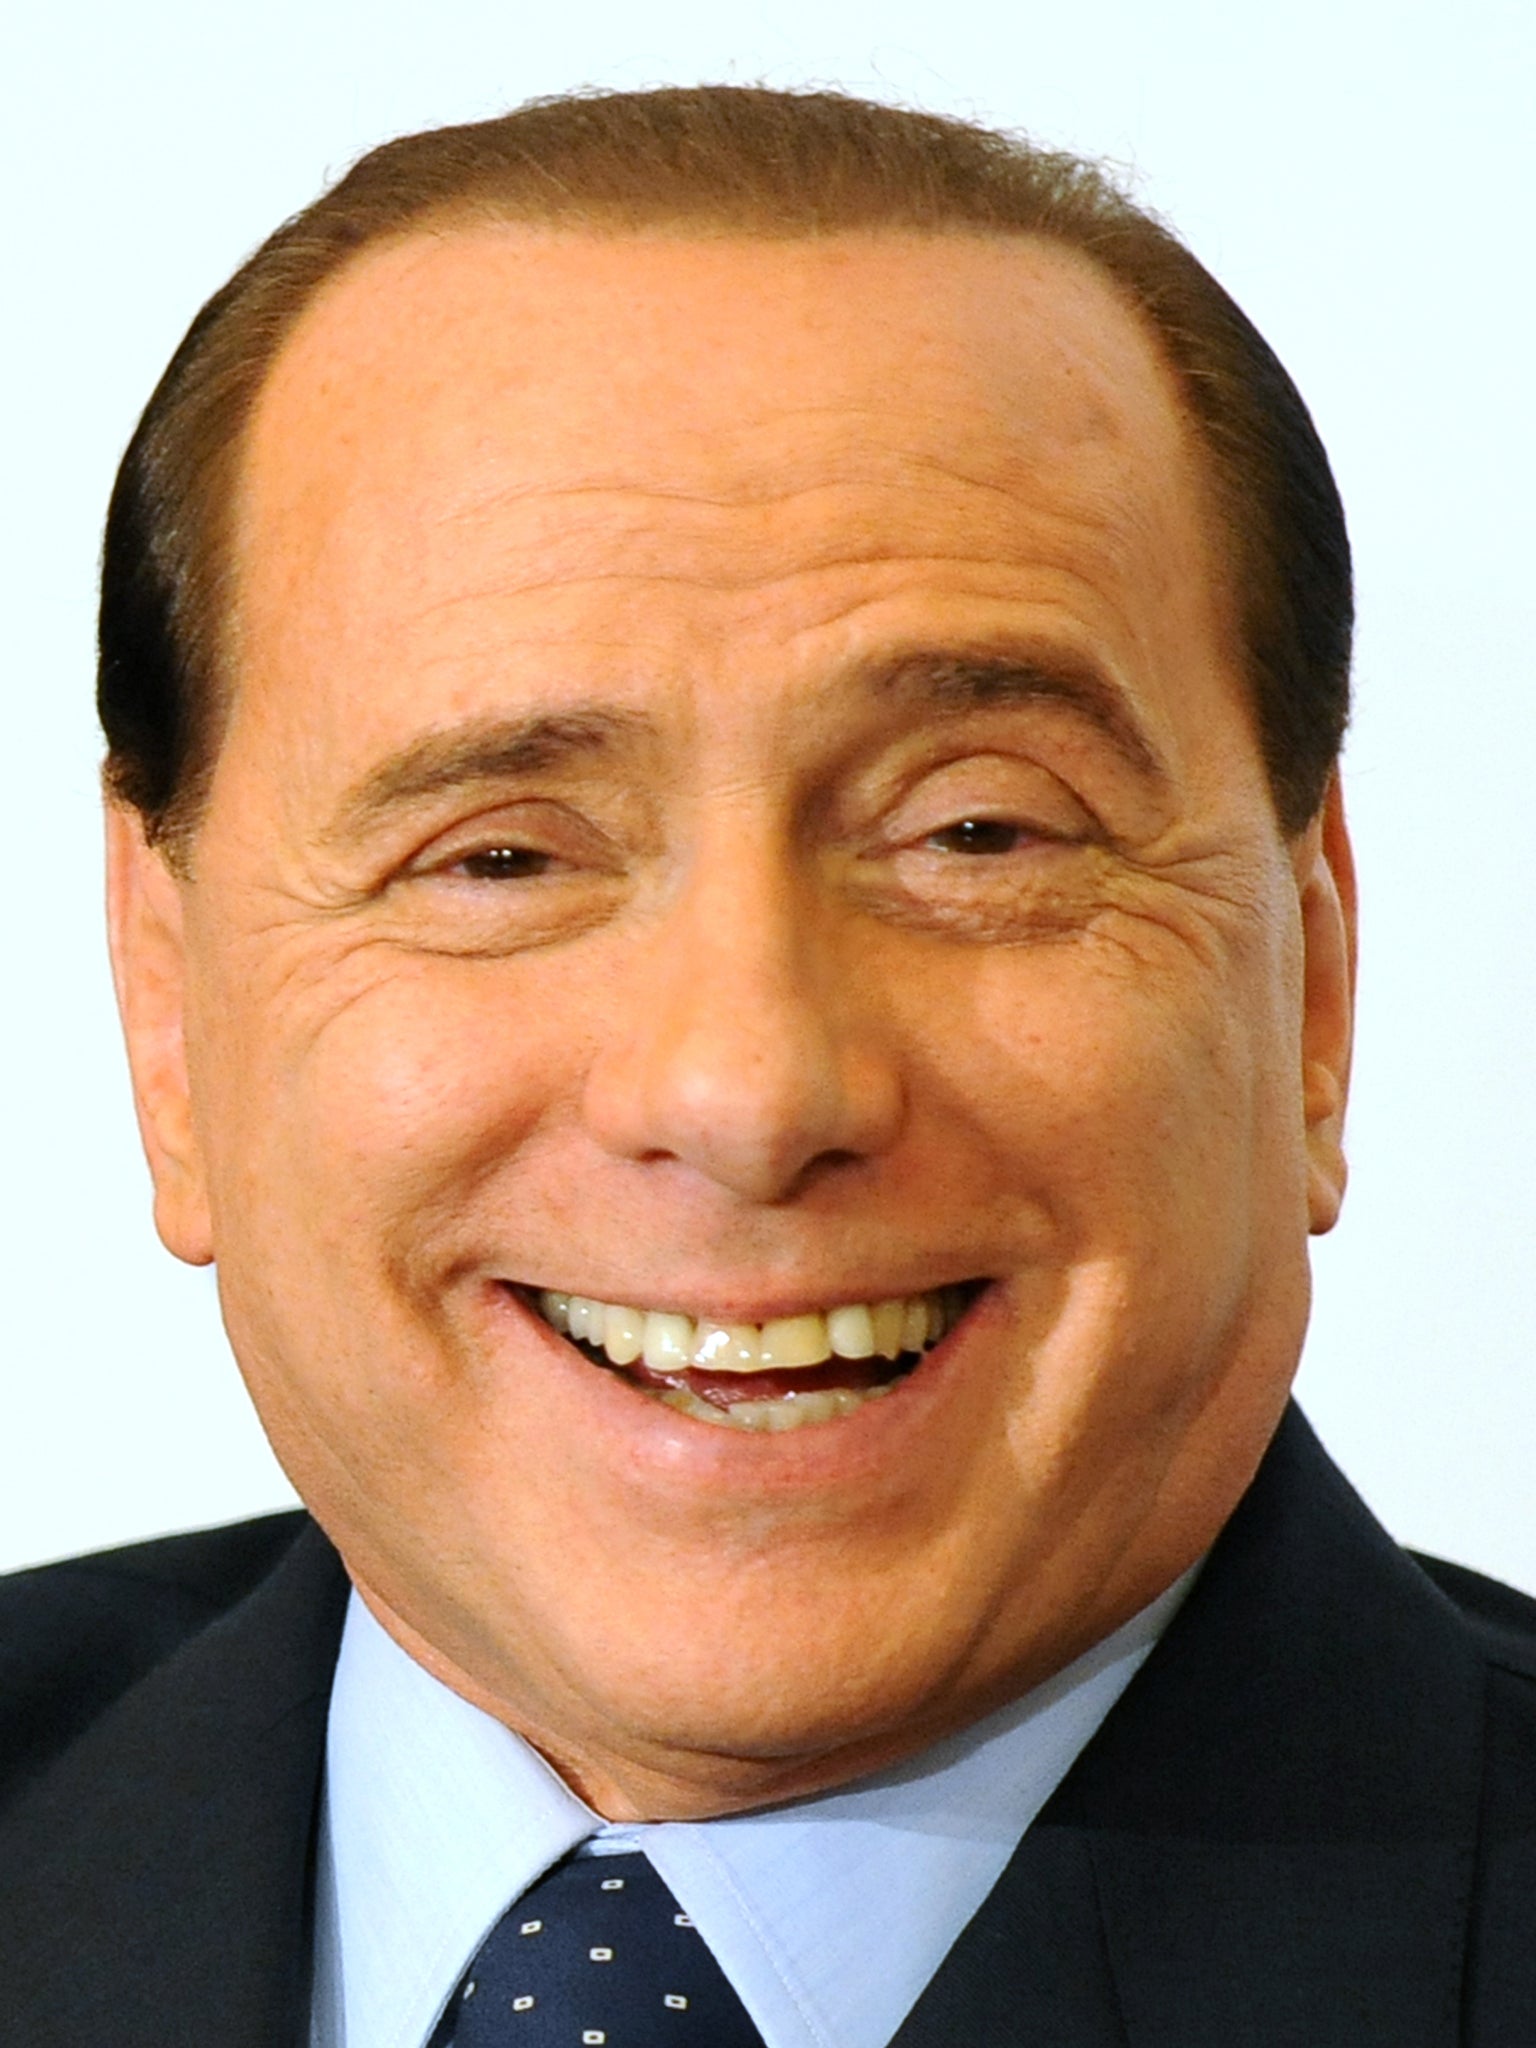 silvio-berlusconi-i-m-being-besieged-by-requests-to-run-in-italian